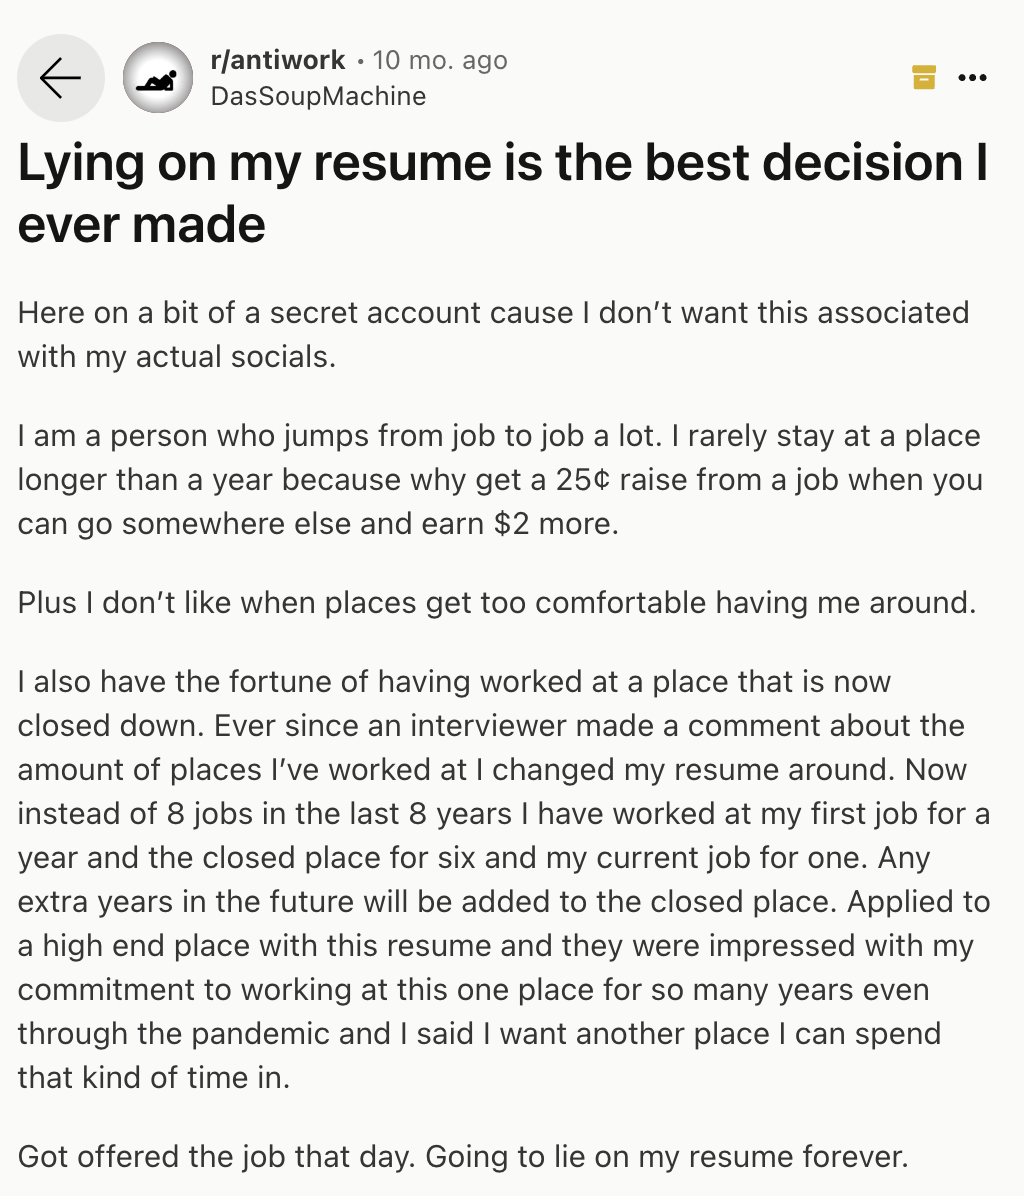 document - rantiwork 10 mo. ago DasSoupMachine Lying on my resume is the best decision I ever made Here on a bit of a secret account cause I don't want this associated with my actual socials. I am a person who jumps from job to job a lot. I rarely stay at